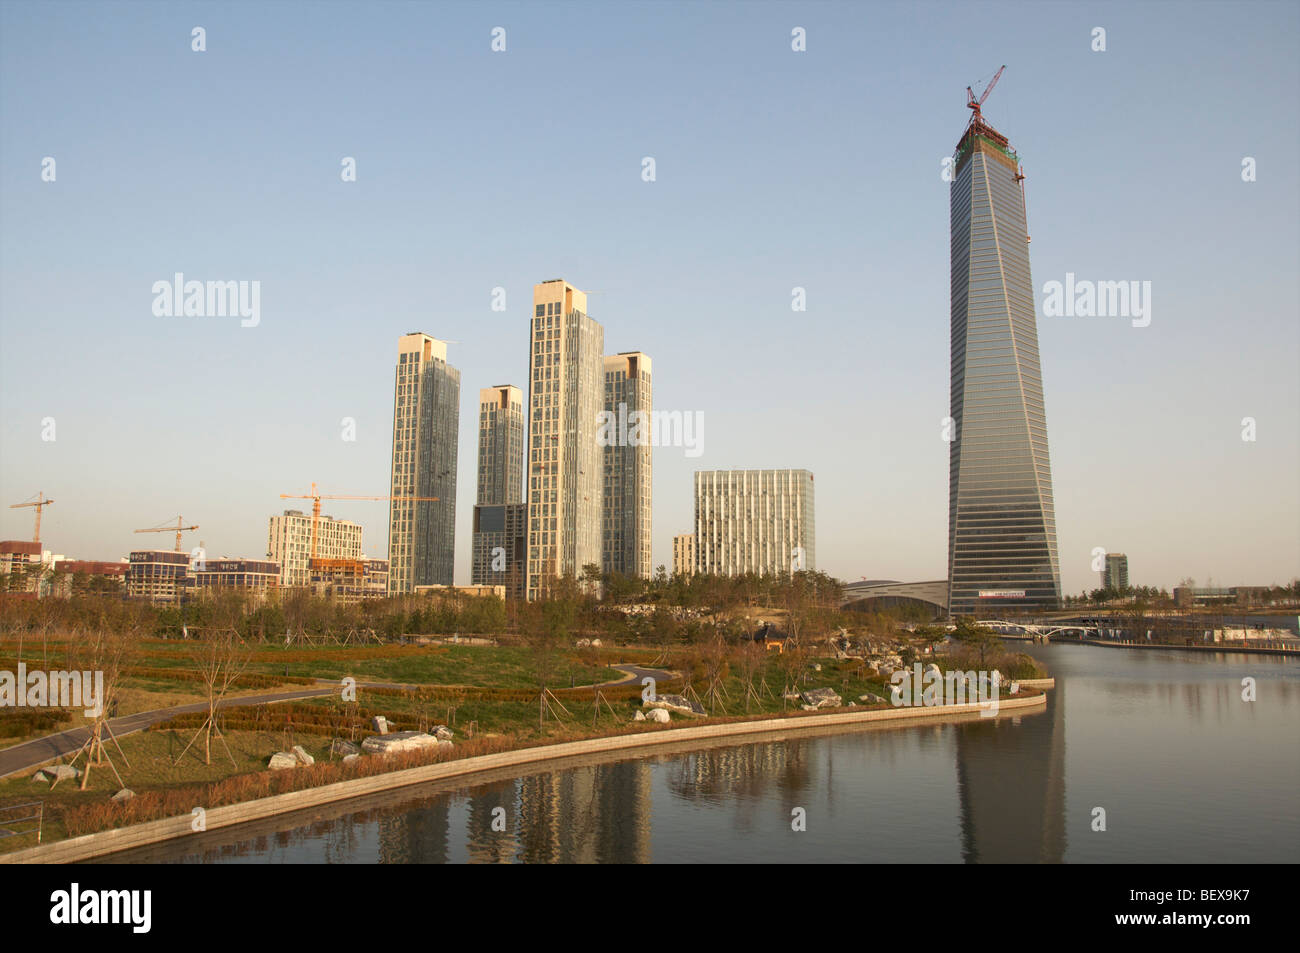 View of the architecture at the new NEAT tower International Free Economic Zone (IFEZ) in Songdo, Incheon, South Korea. October Stock Photo